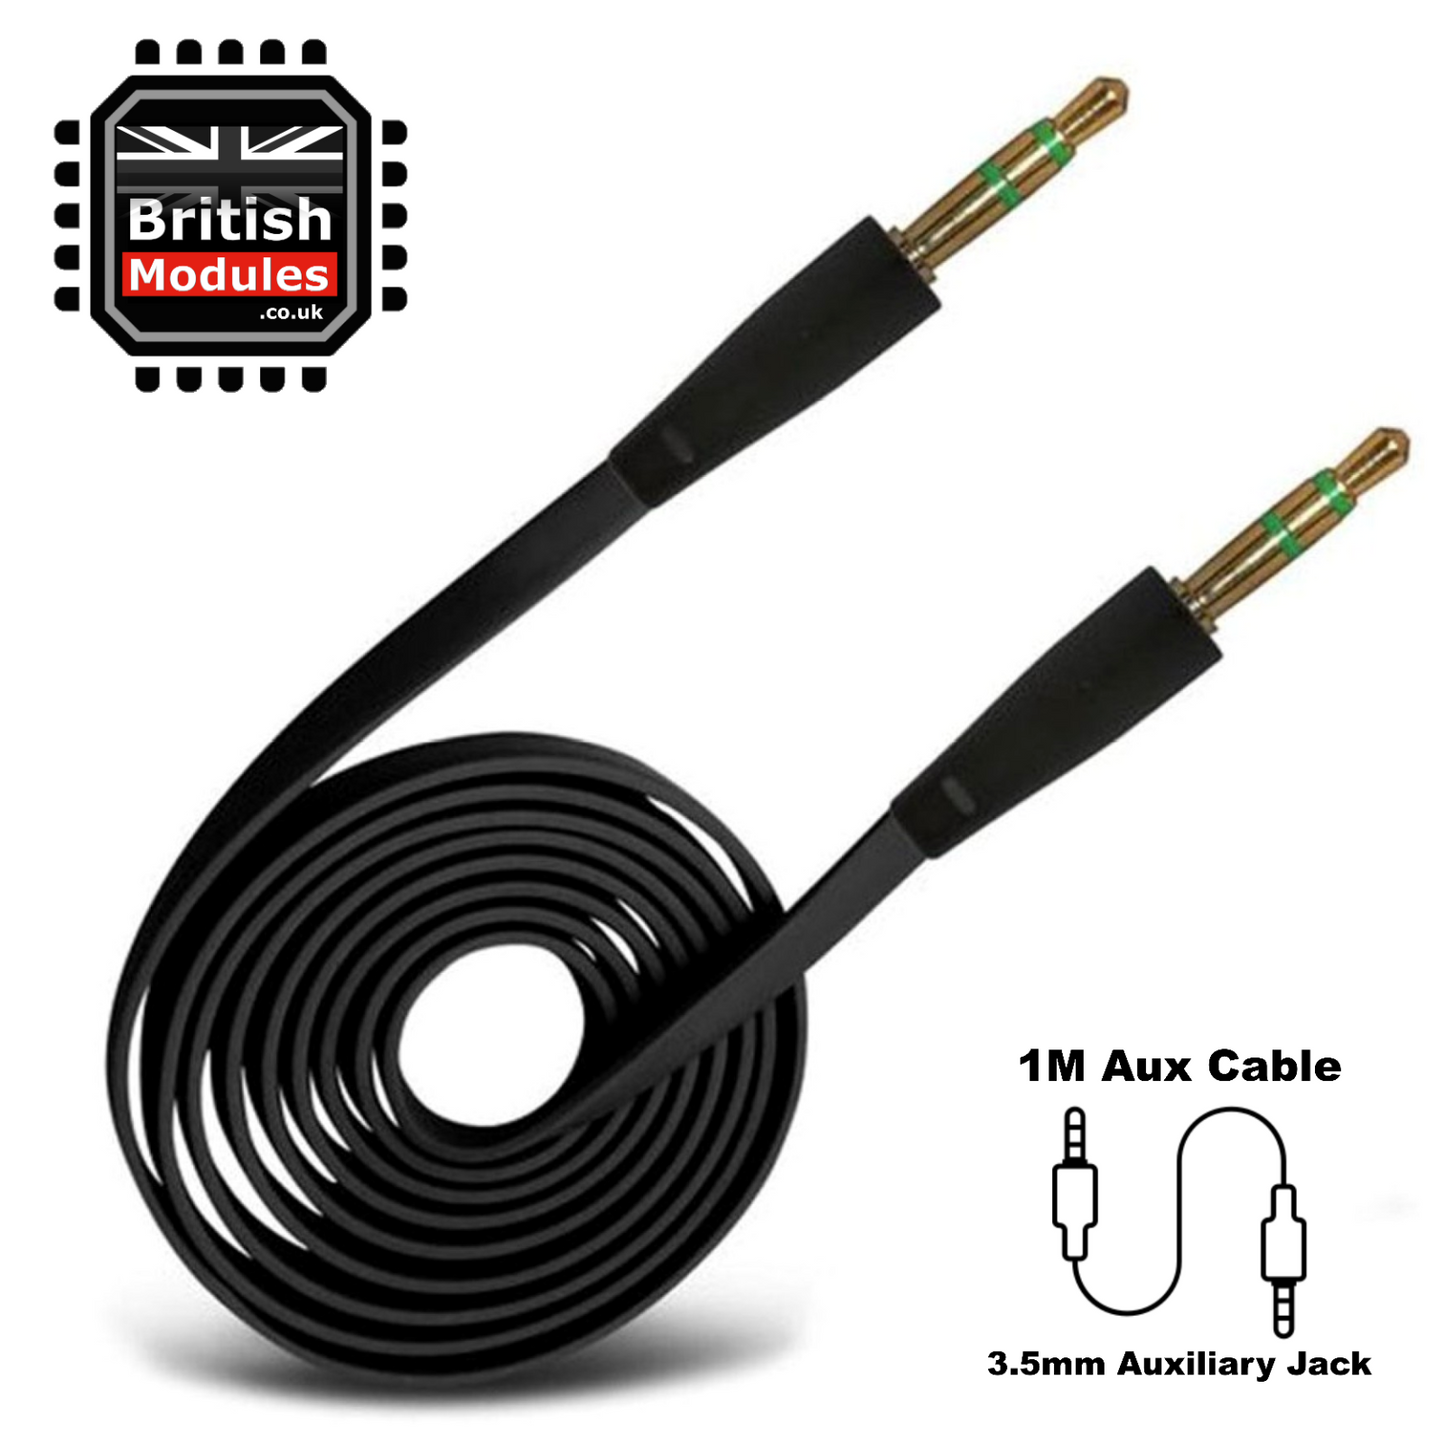 Auxiliary Cable 1M Gold Aux Audio Cable 3.5mm Jack Male Stereo Lead Car PC Phone